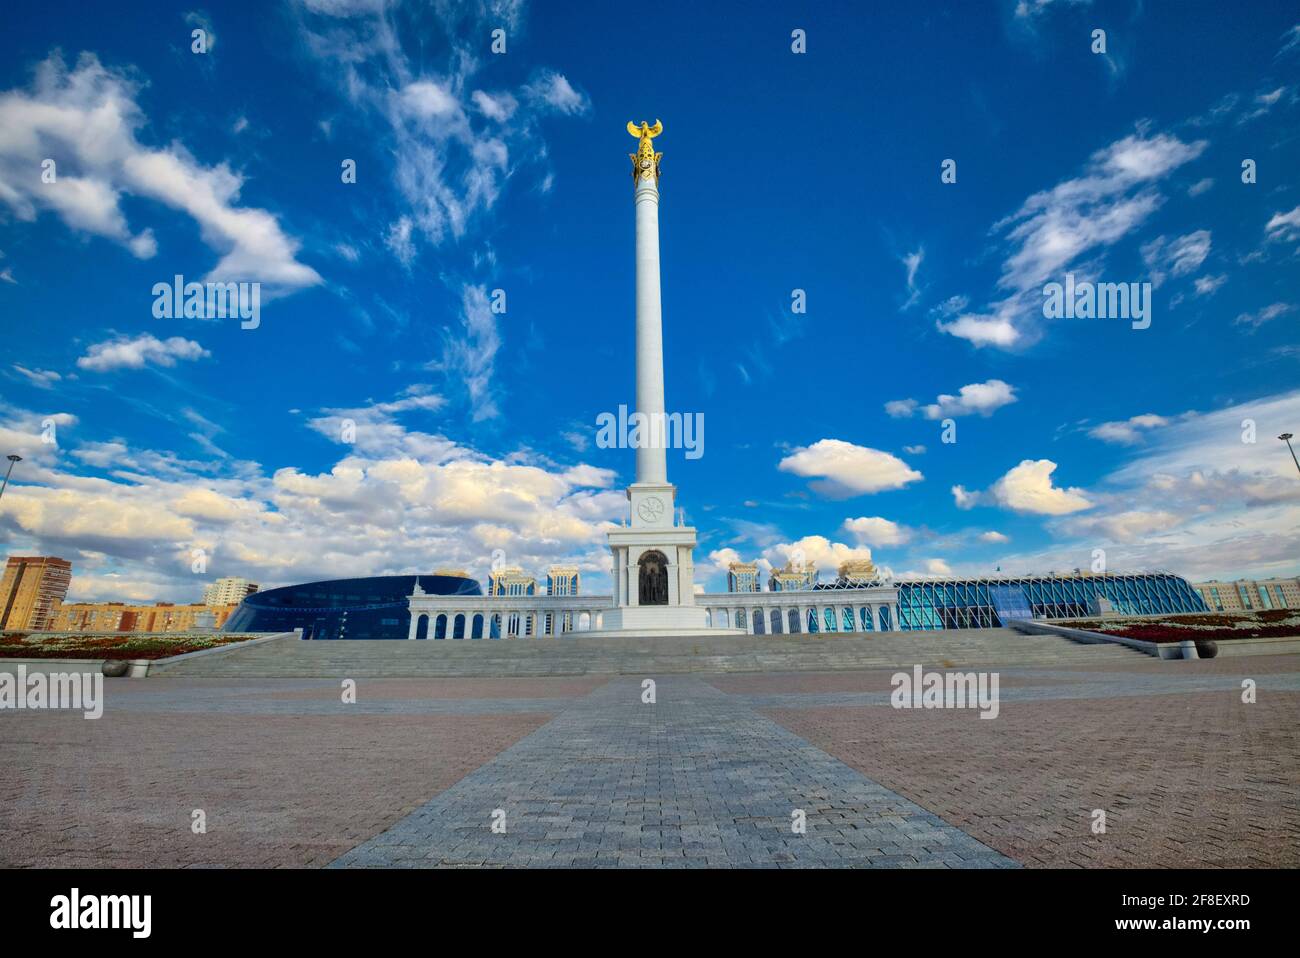 Independence Square (Kazakh: Тәуелсіздік алаңы) also referred to as Kazakh Eli Square, is the main square in Nur-Sultan, Kazakhstan. It was made in Oc Stock Photo